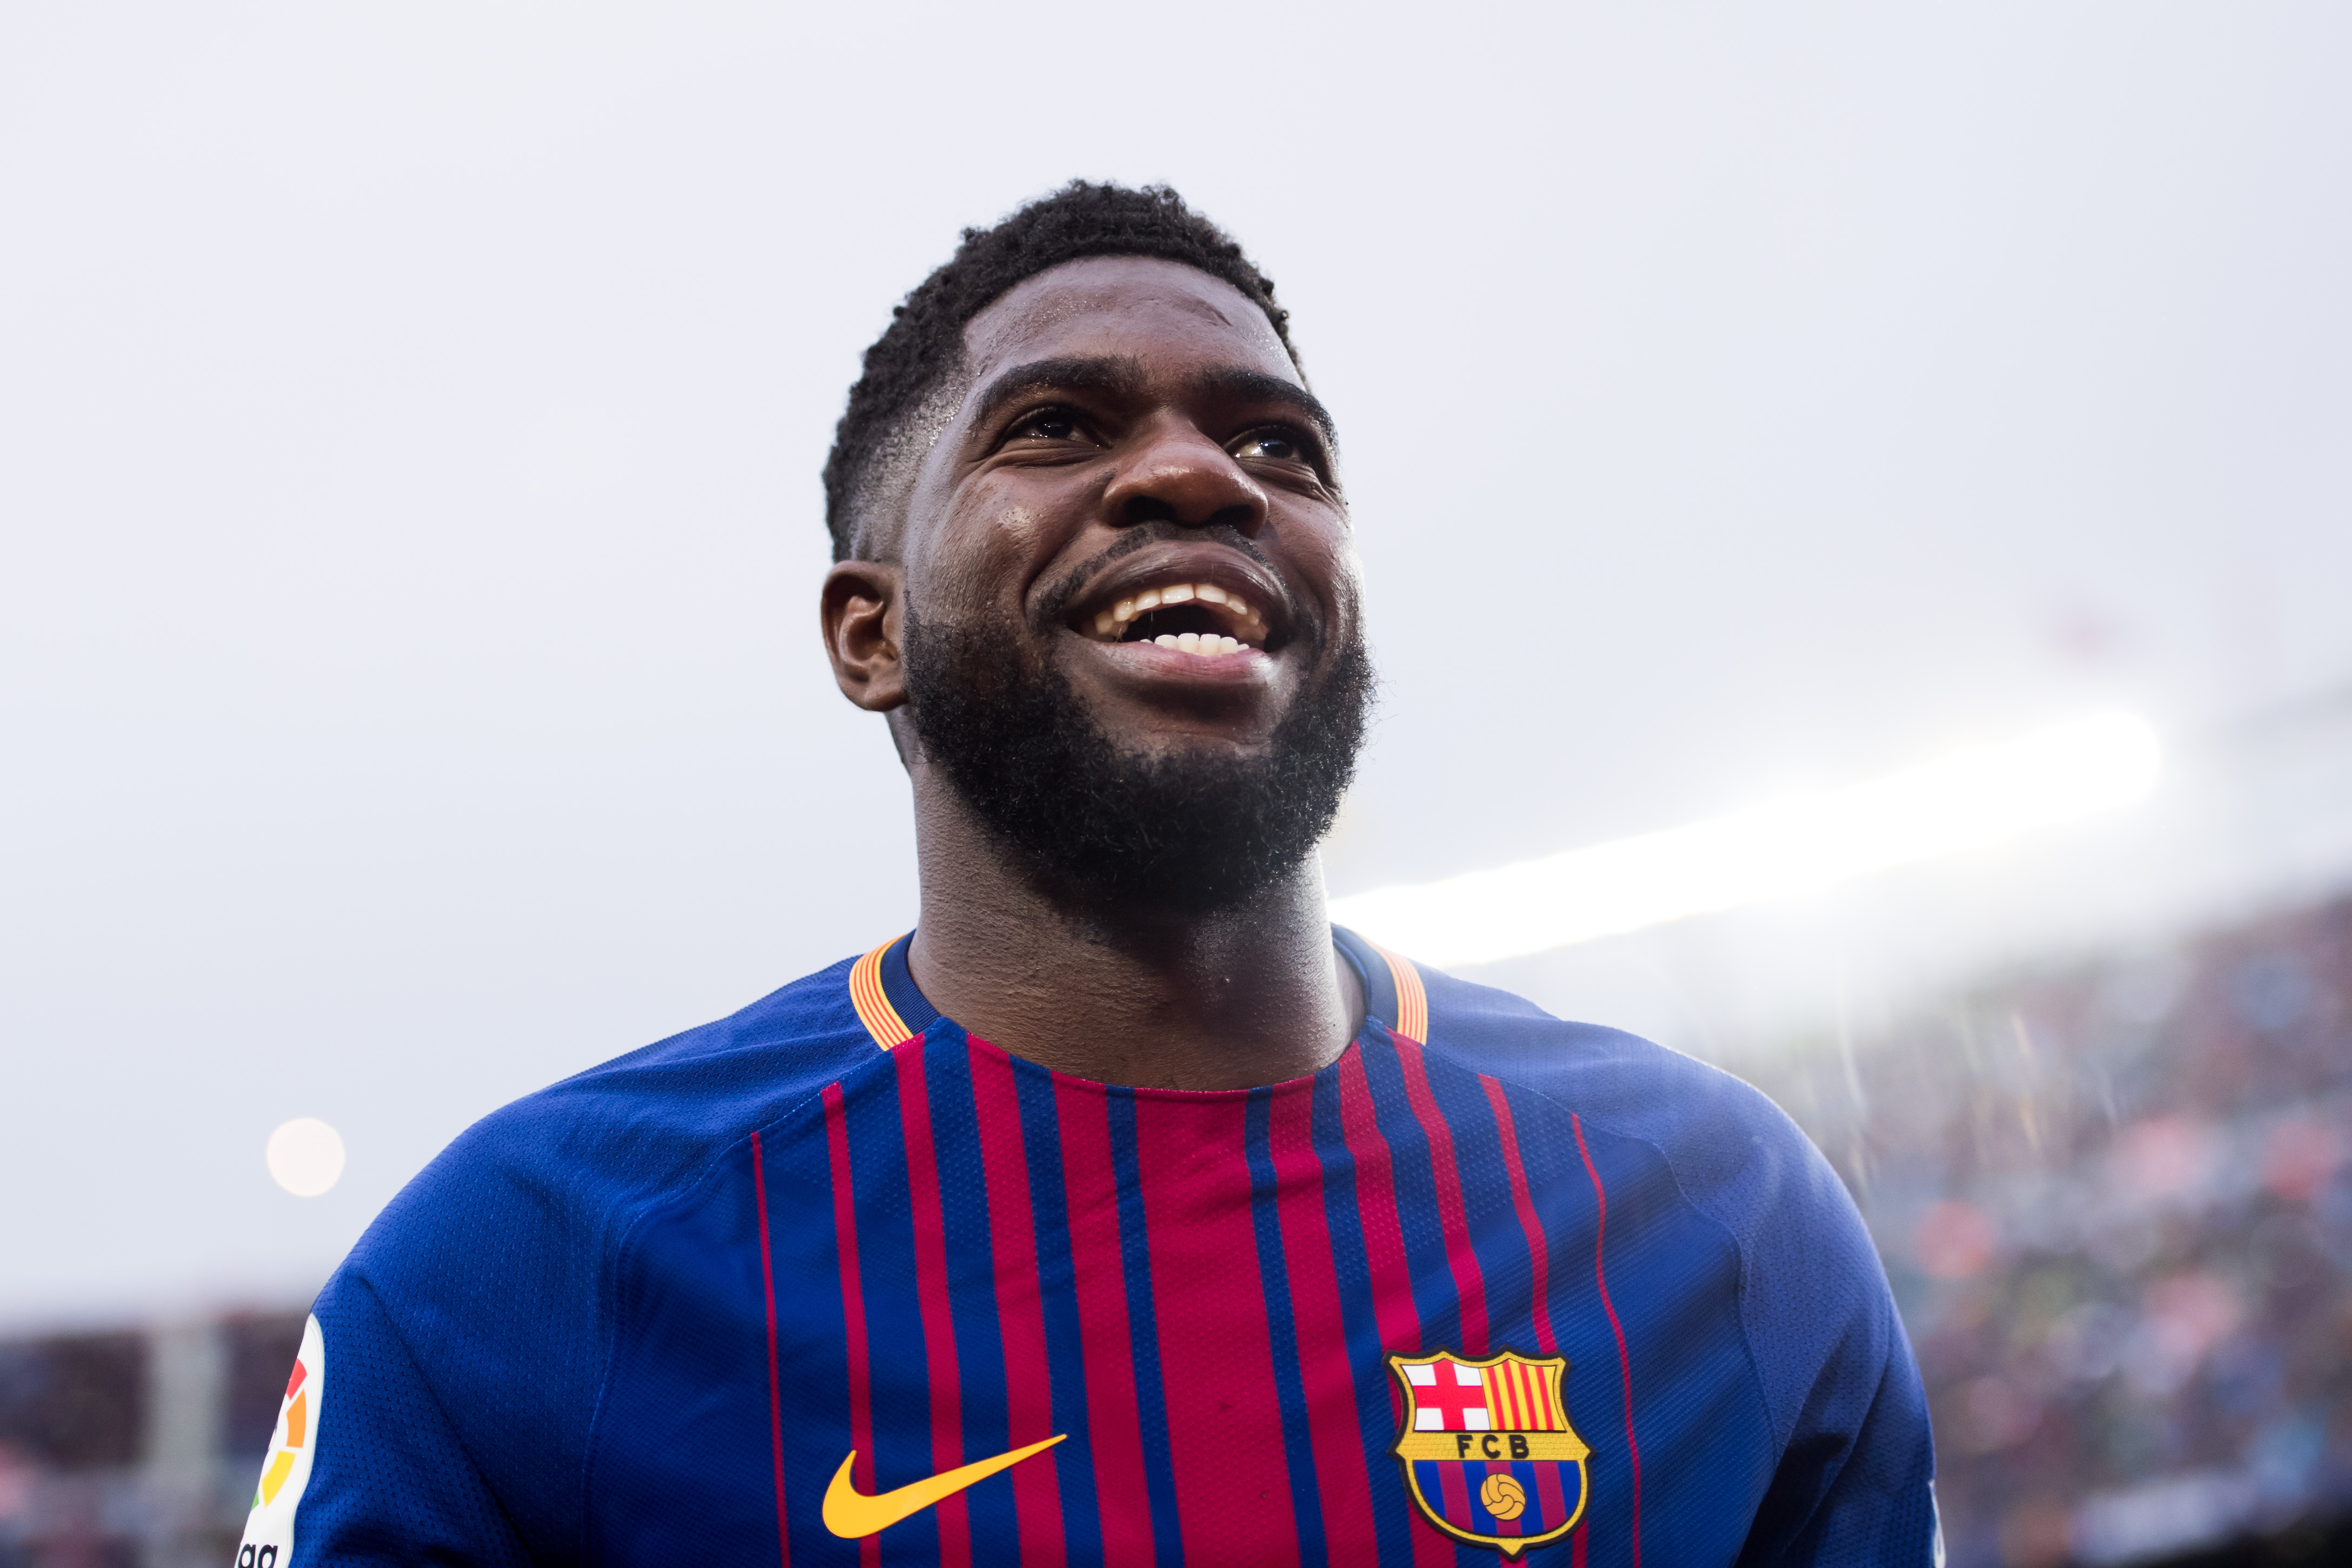 BARCELONA, SPAIN - MARCH 04:  Samuel Umtiti of FC Barcelona reacts during the La Liga match between Barcelona and Atletico Madrid at Camp Nou on March 4, 2018 in Barcelona, Spain.  (Photo by Alex Caparros/Getty Images)